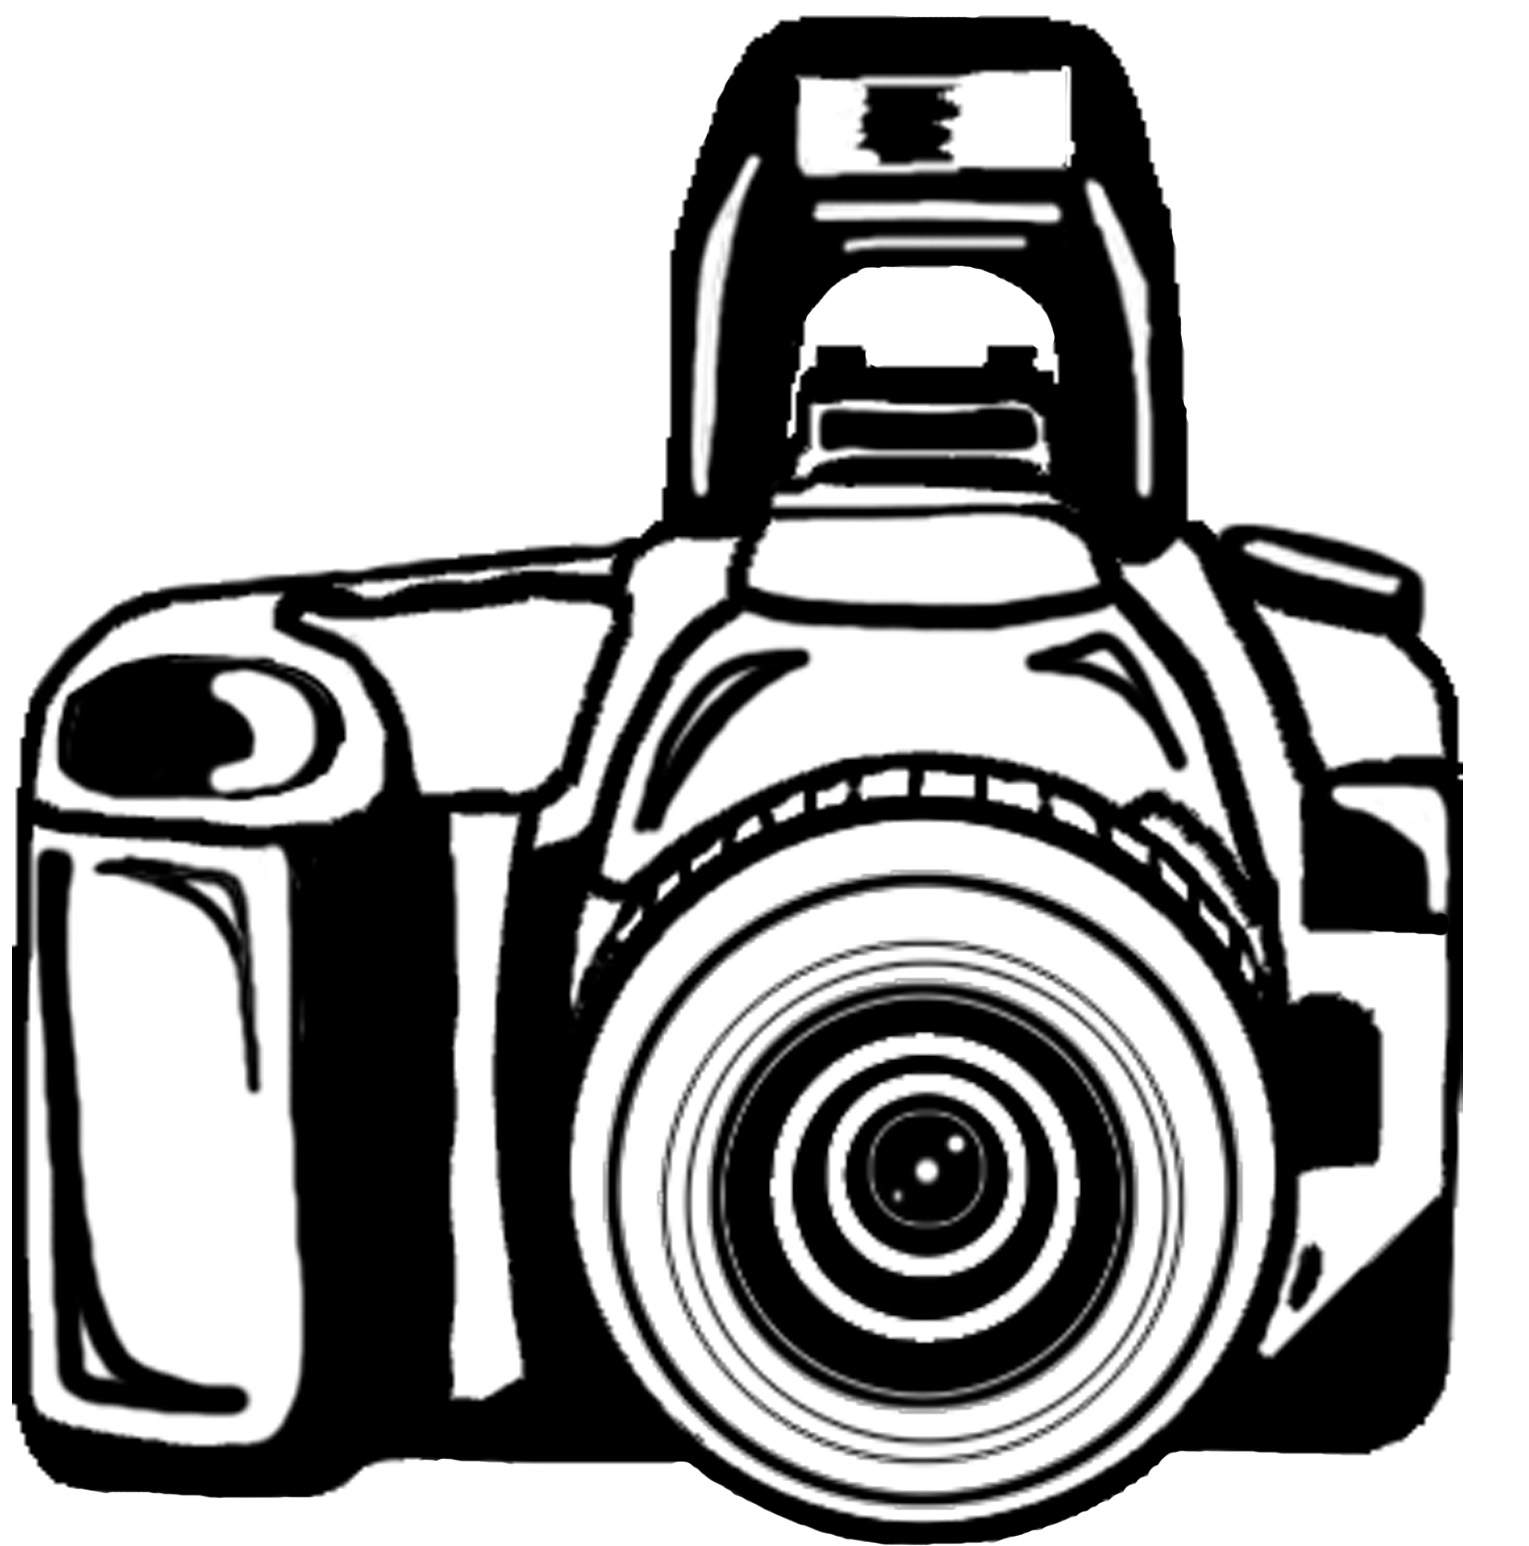 in a wedding photographer | Clipart Panda - Free Clipart Images